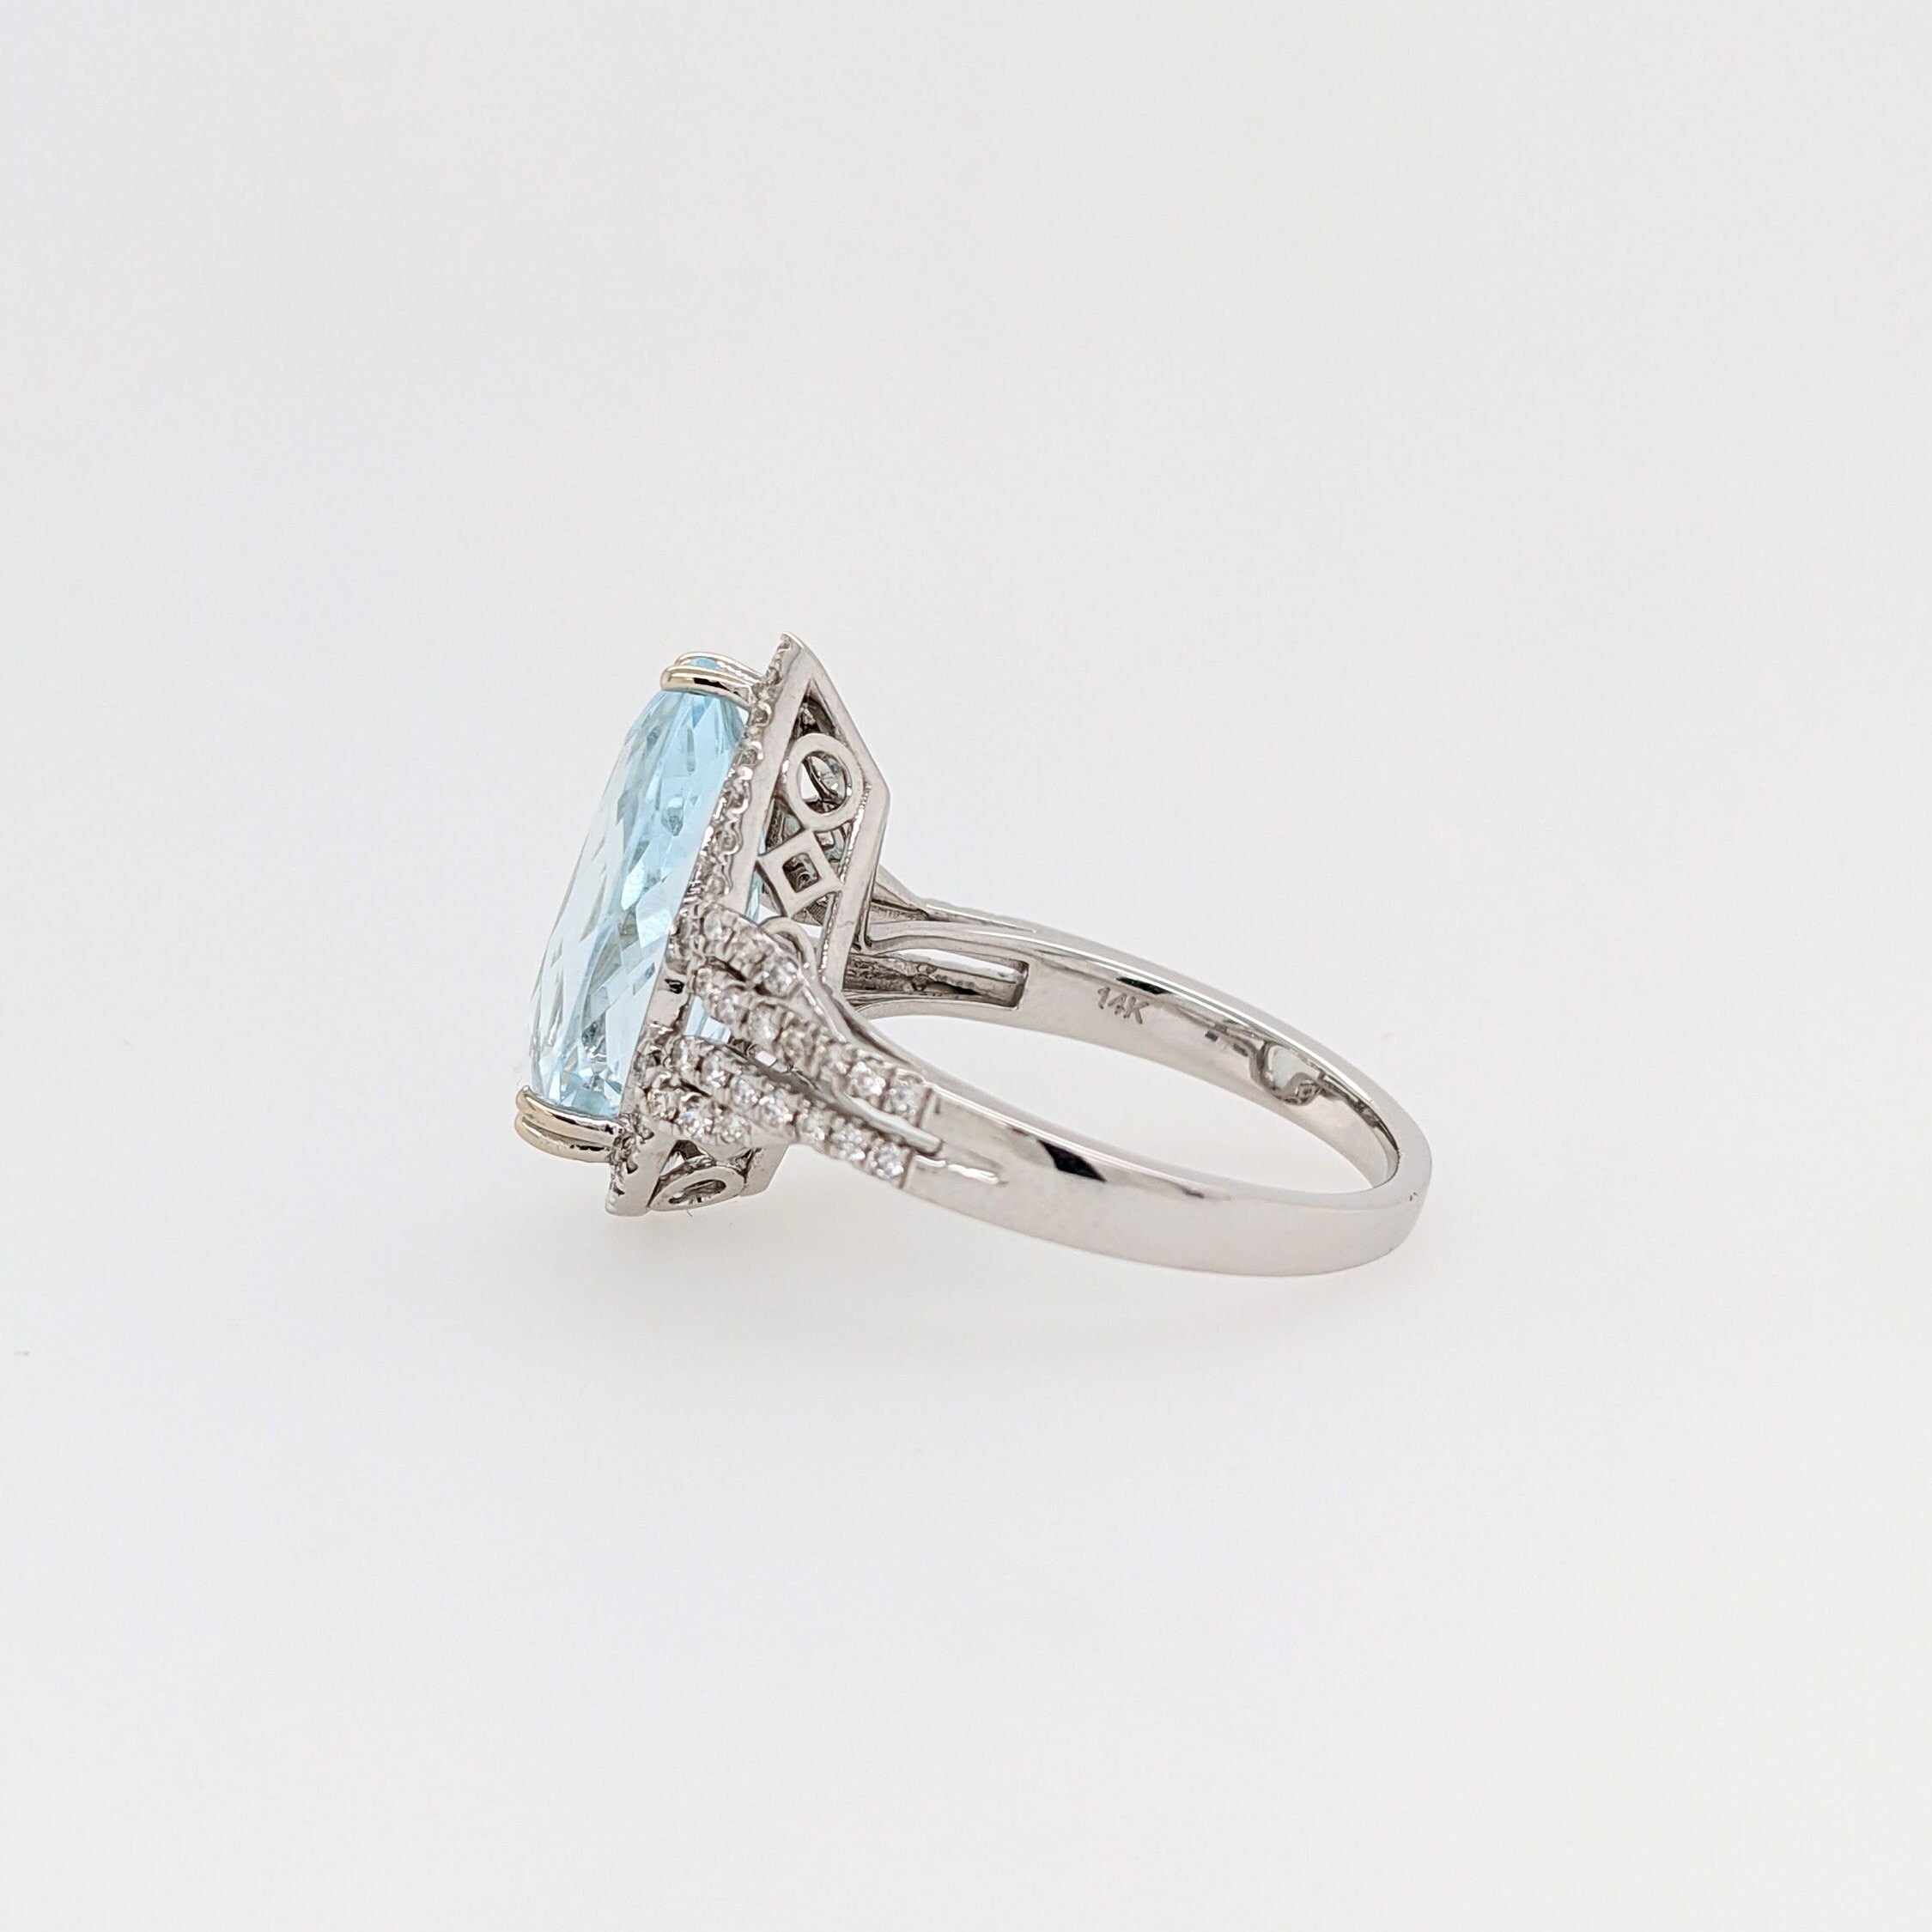 Eye-catching Aquamarine Ring in Solid 14K White Gold with Natural Diamond Accents | Pear Shape 15x9mm | March Birthstone | Statement Ring